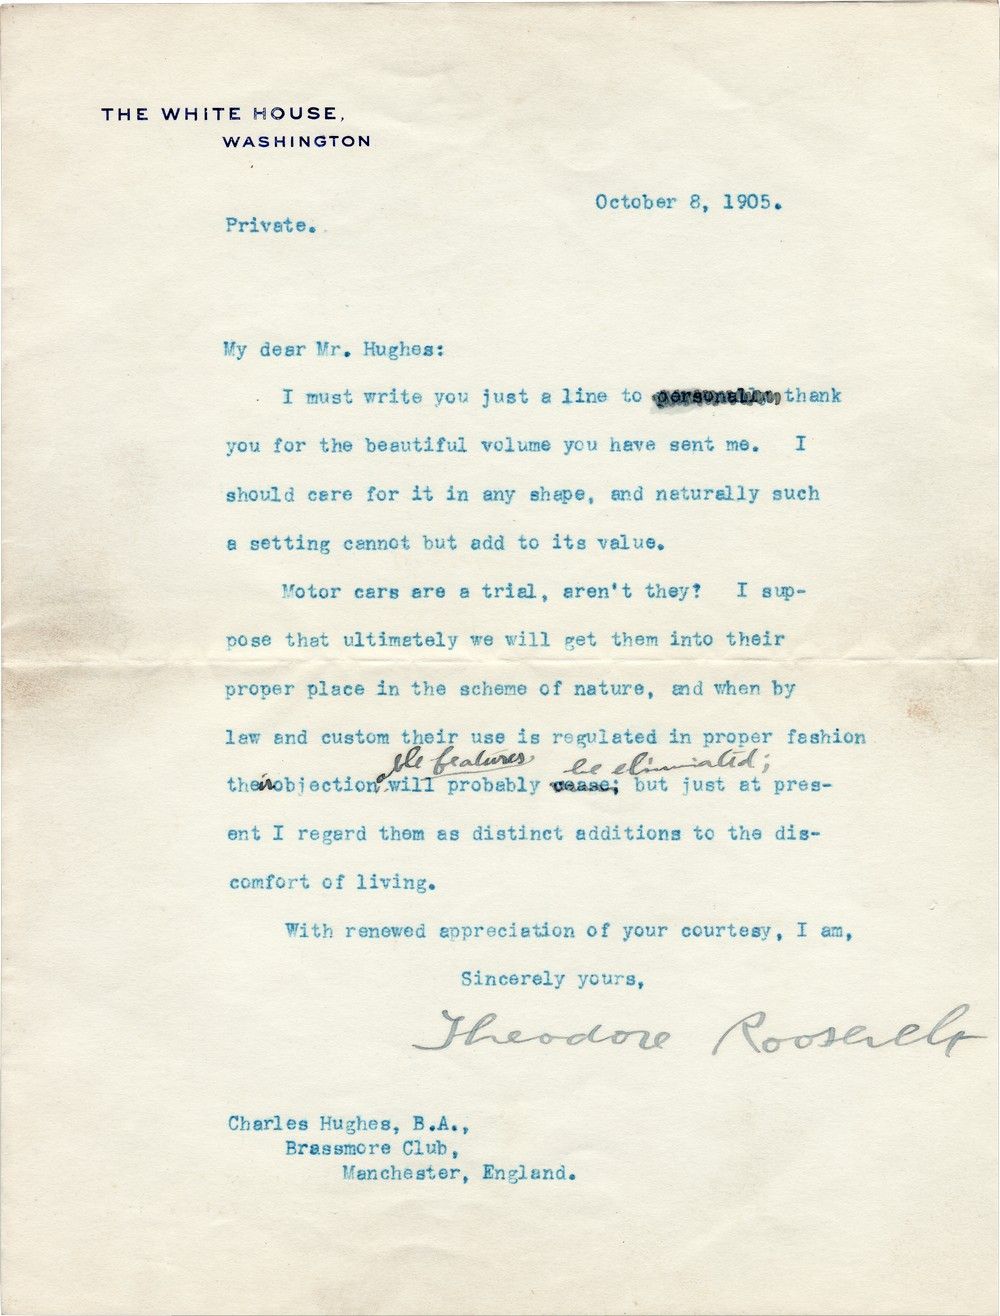 Theodore Roosevelt Expresses His Dislike of the Motor Car